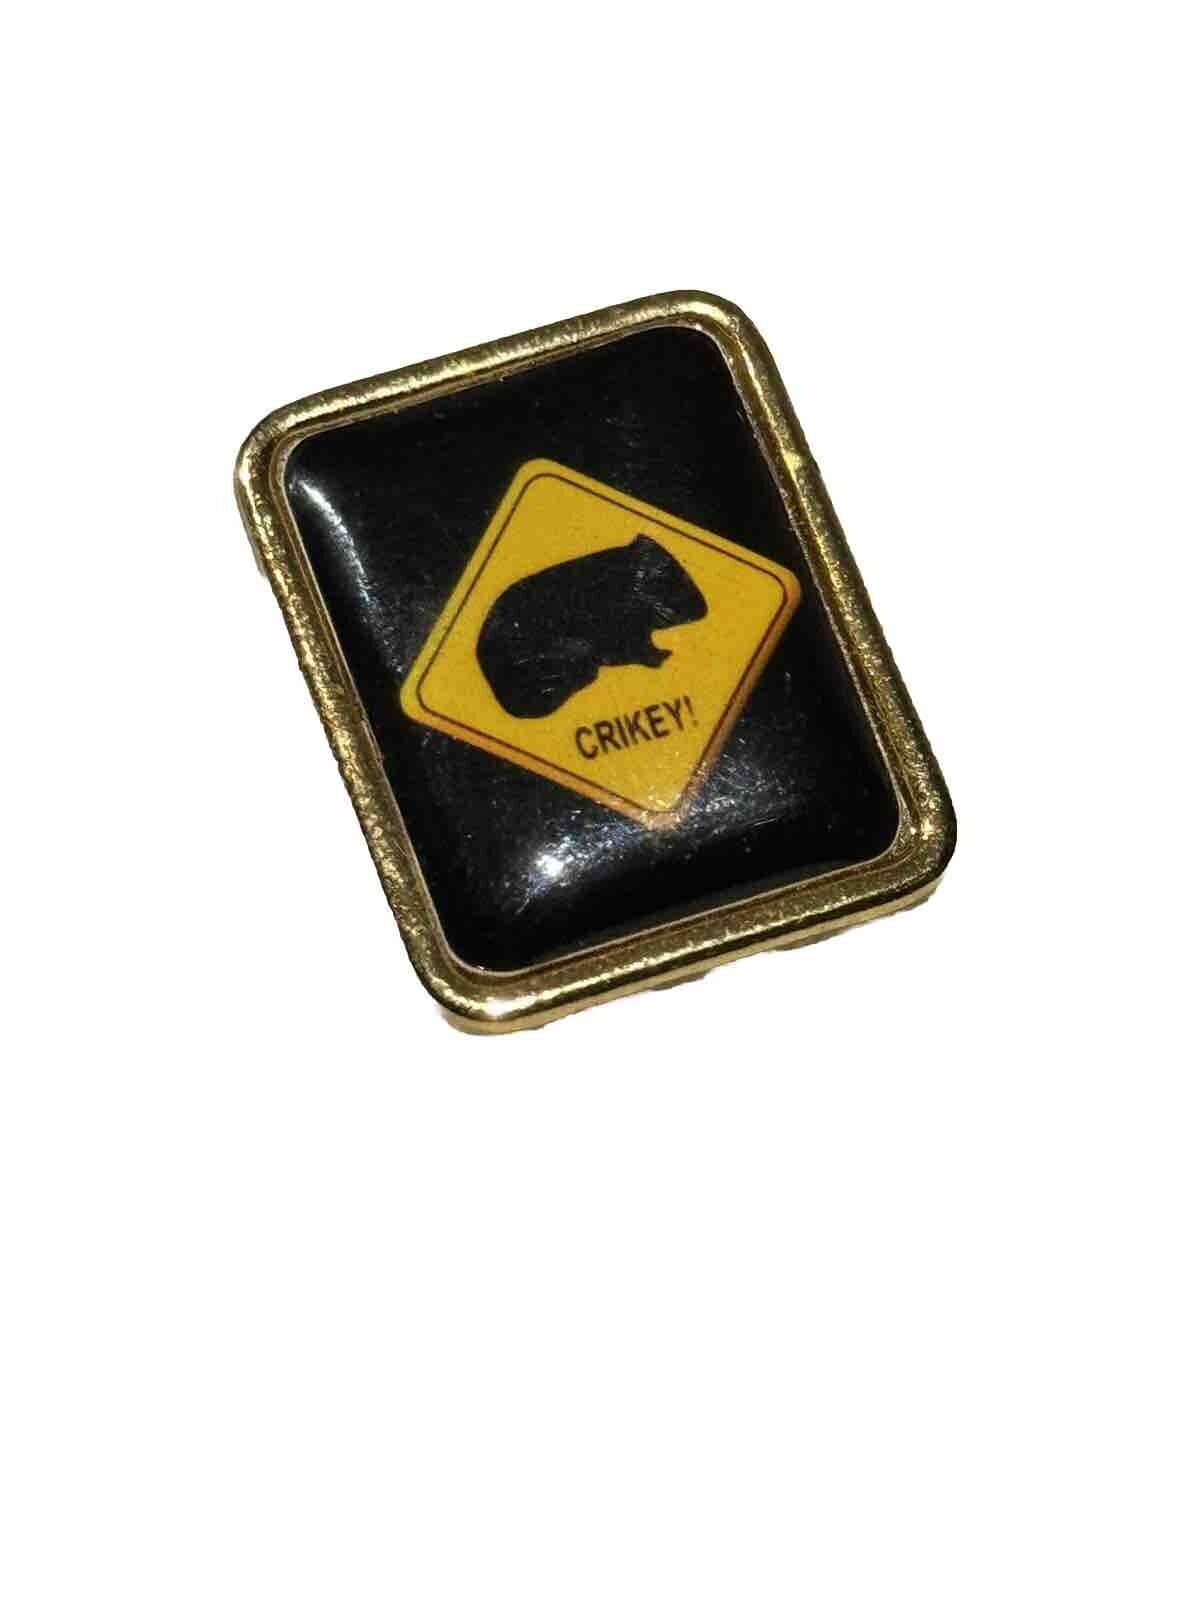 Vintage Pin CRIKEY Spell Out Wombat Image Perfection Brand